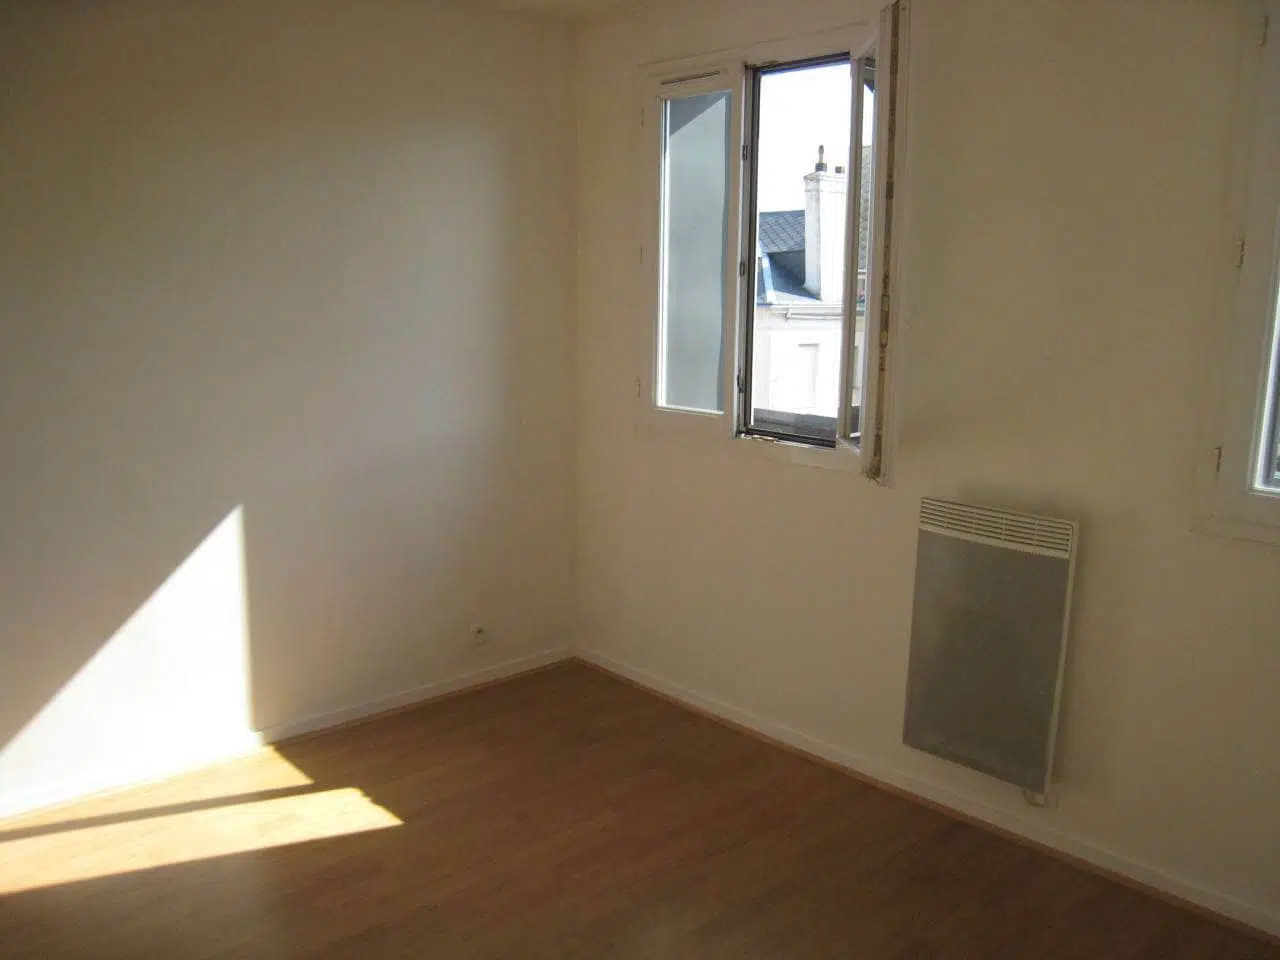 Location Appartement type F3 Le Havre 322